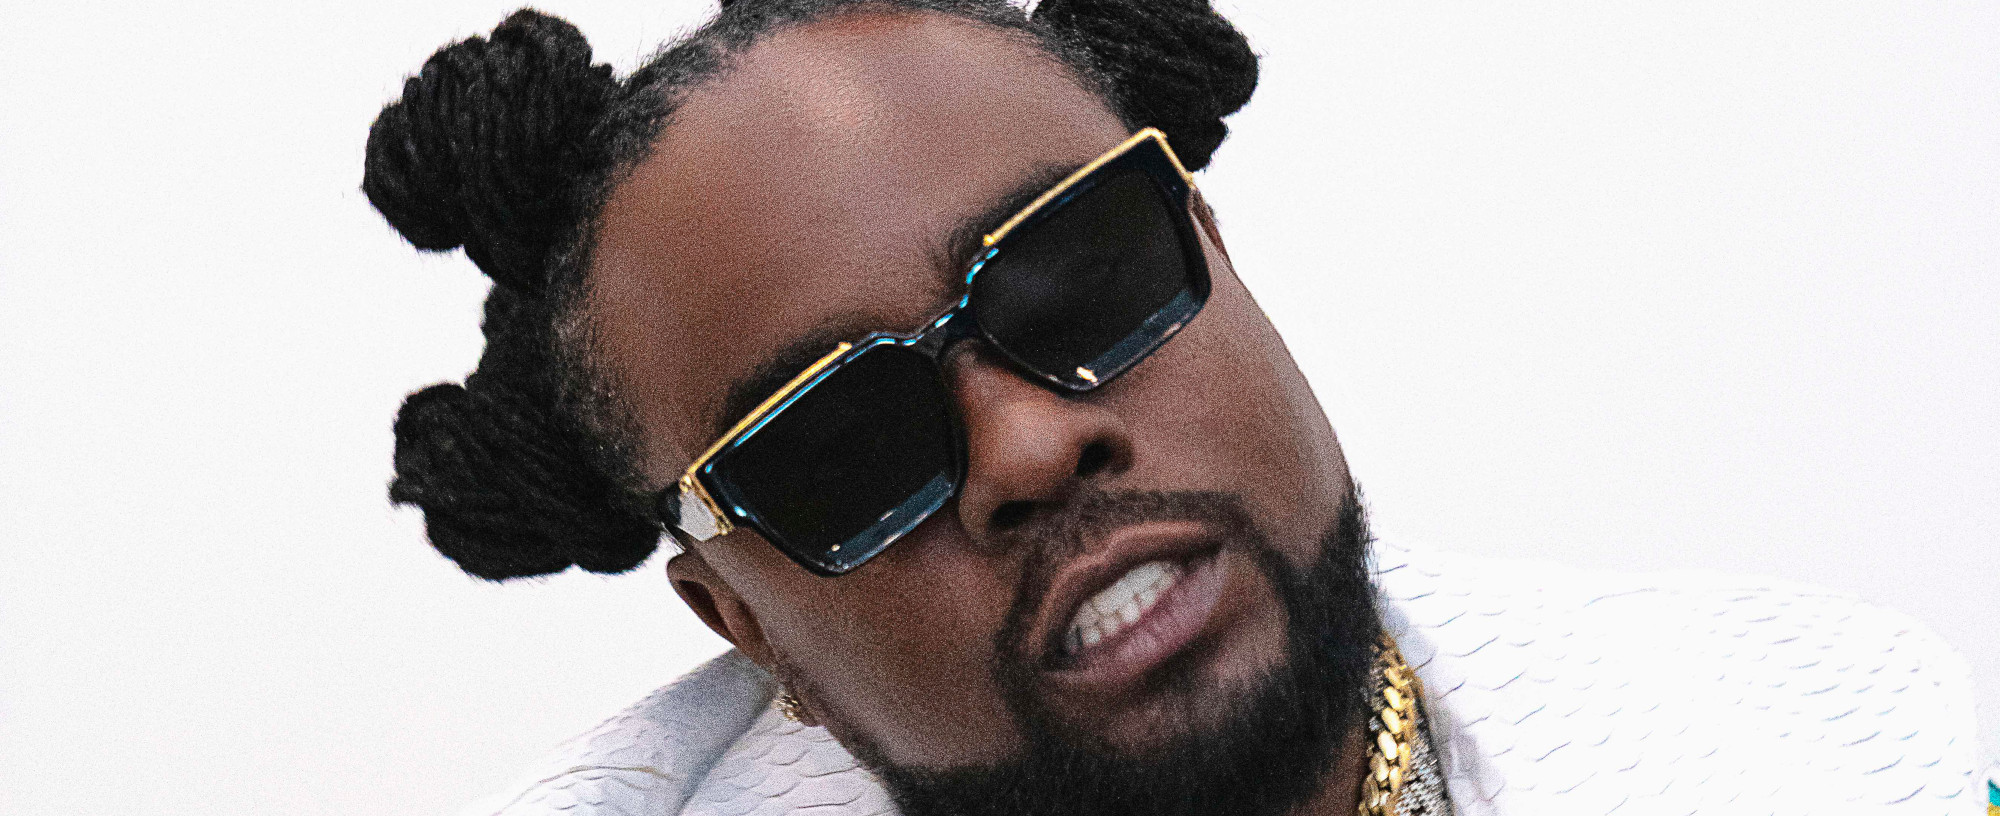 Wale Pulls out of Broccoli Festival, Citing “Respect”